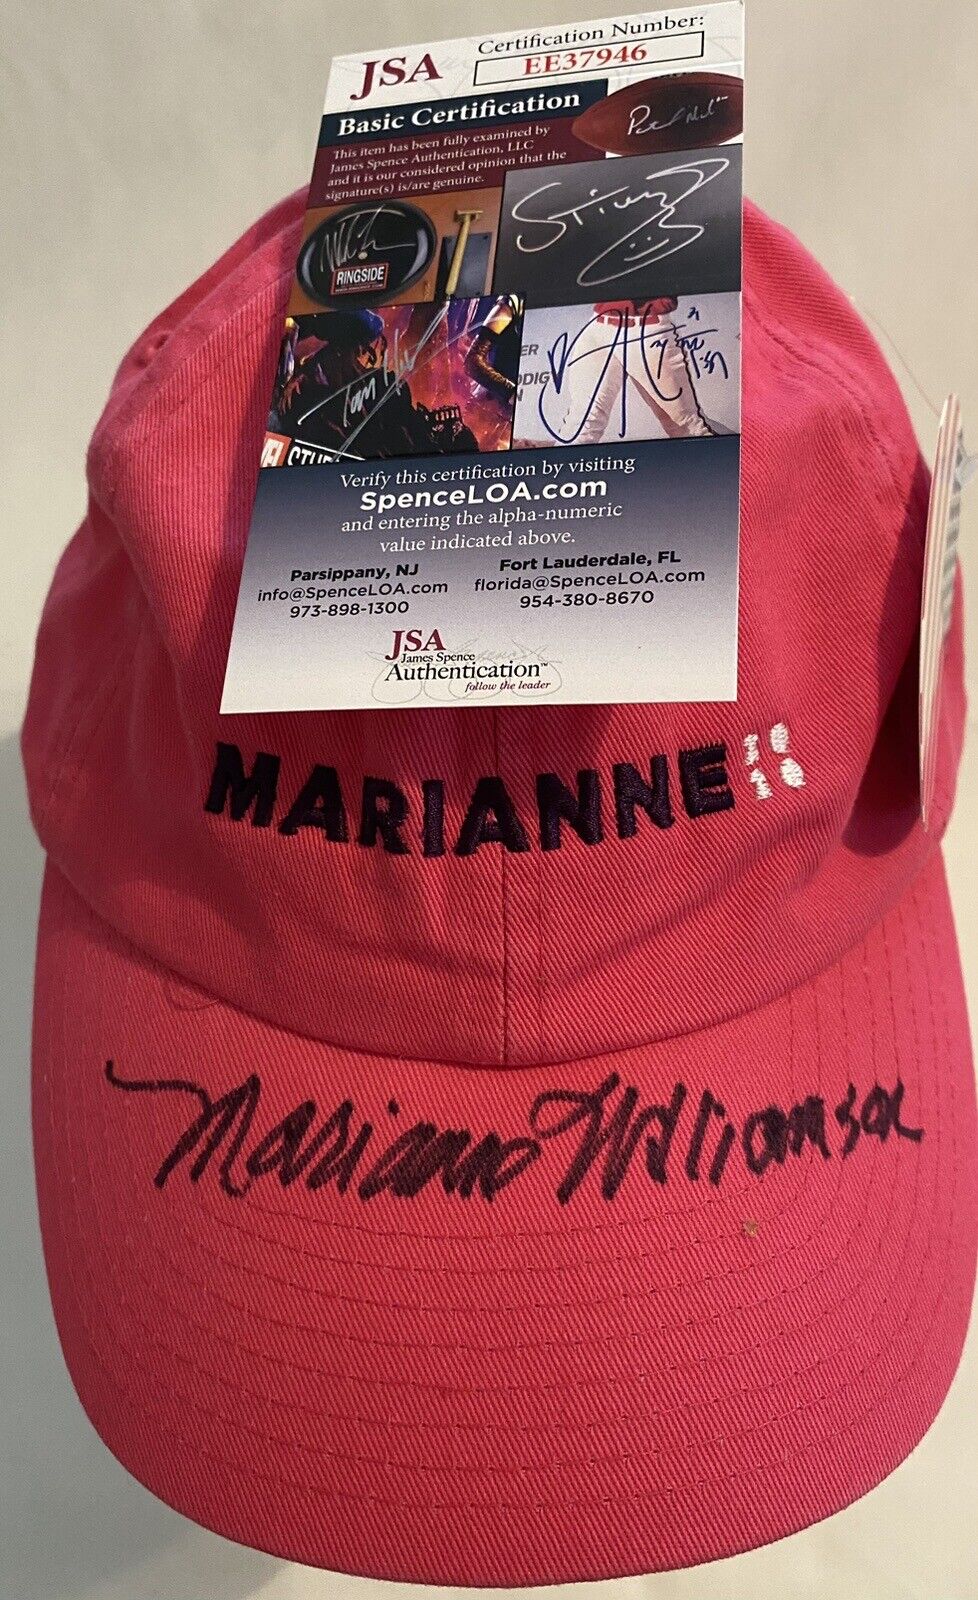 Signed New Marianne Williamson Pink Cap 2020 JSA COA Presidential Candidate NWT